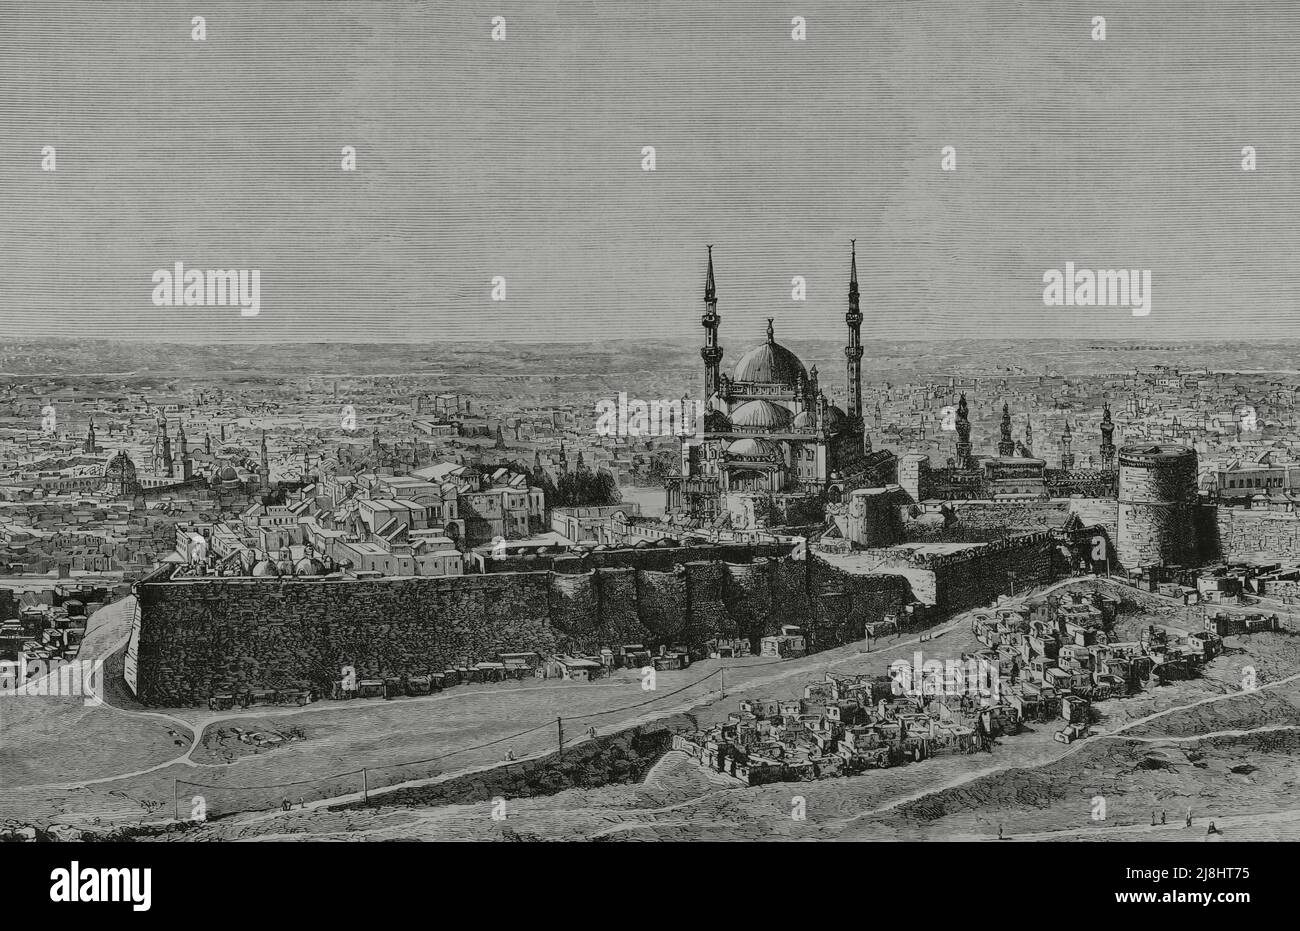 Egypt, Cairo. General view of the city. Engraving by Capuz, 1882. Stock Photo